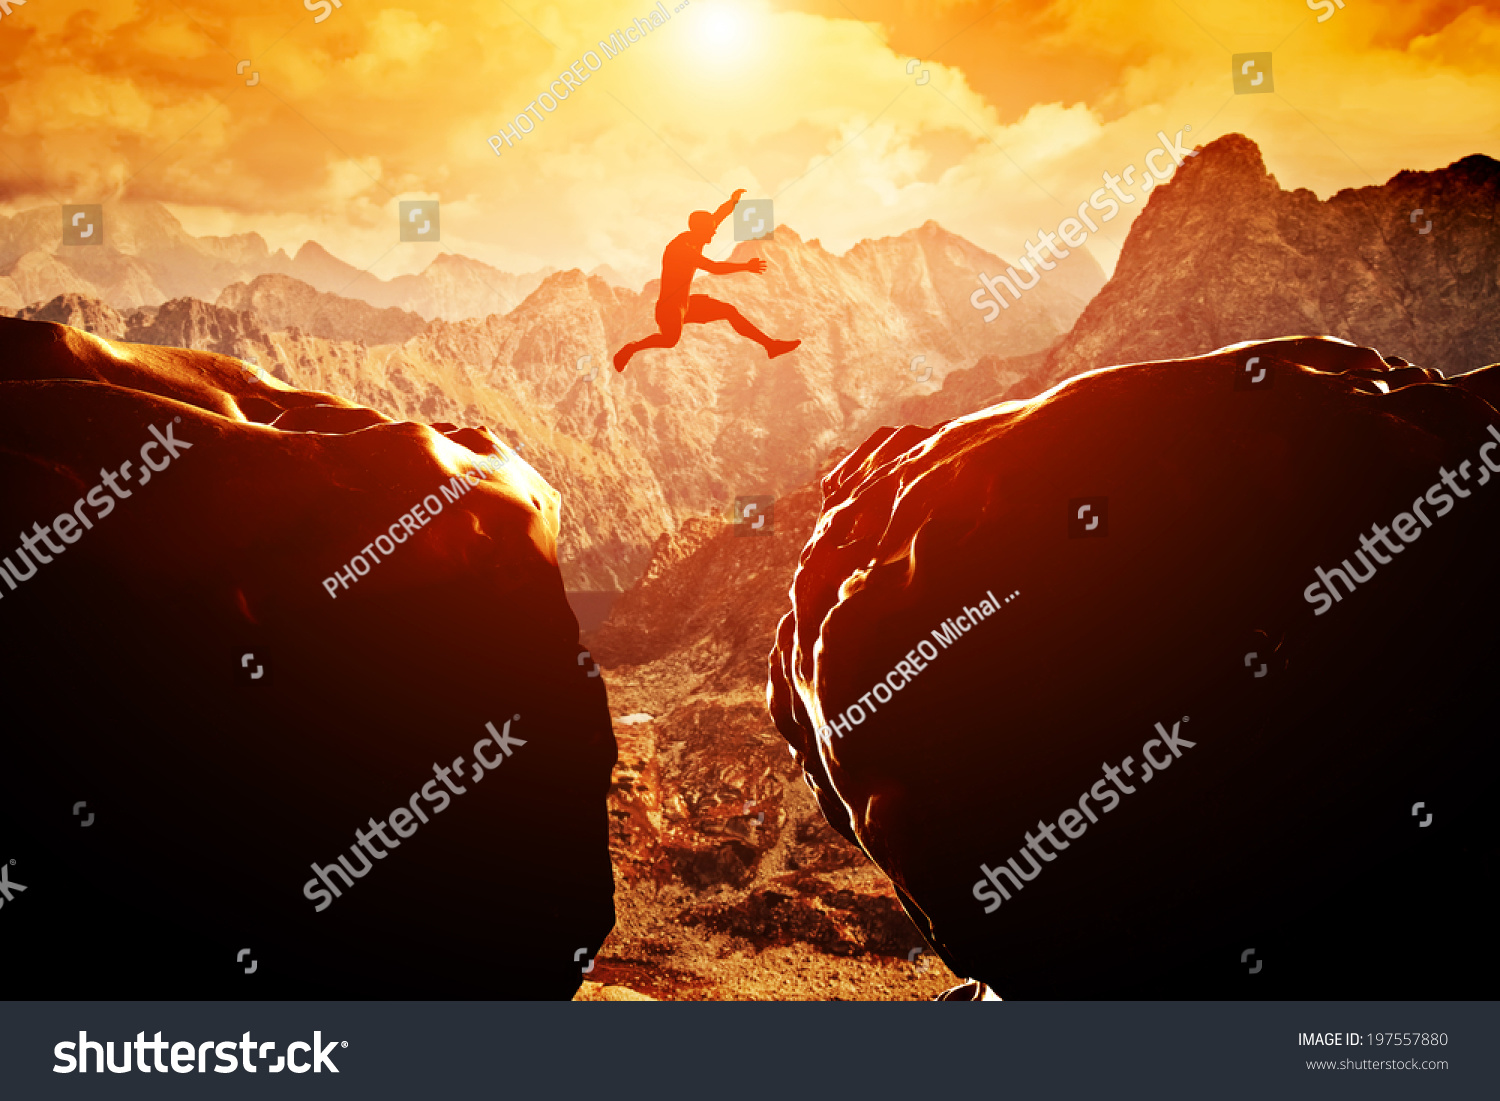 Man jumping over precipice between two rocky mountains at sunset. Freedom, risk, challenge, success. #197557880